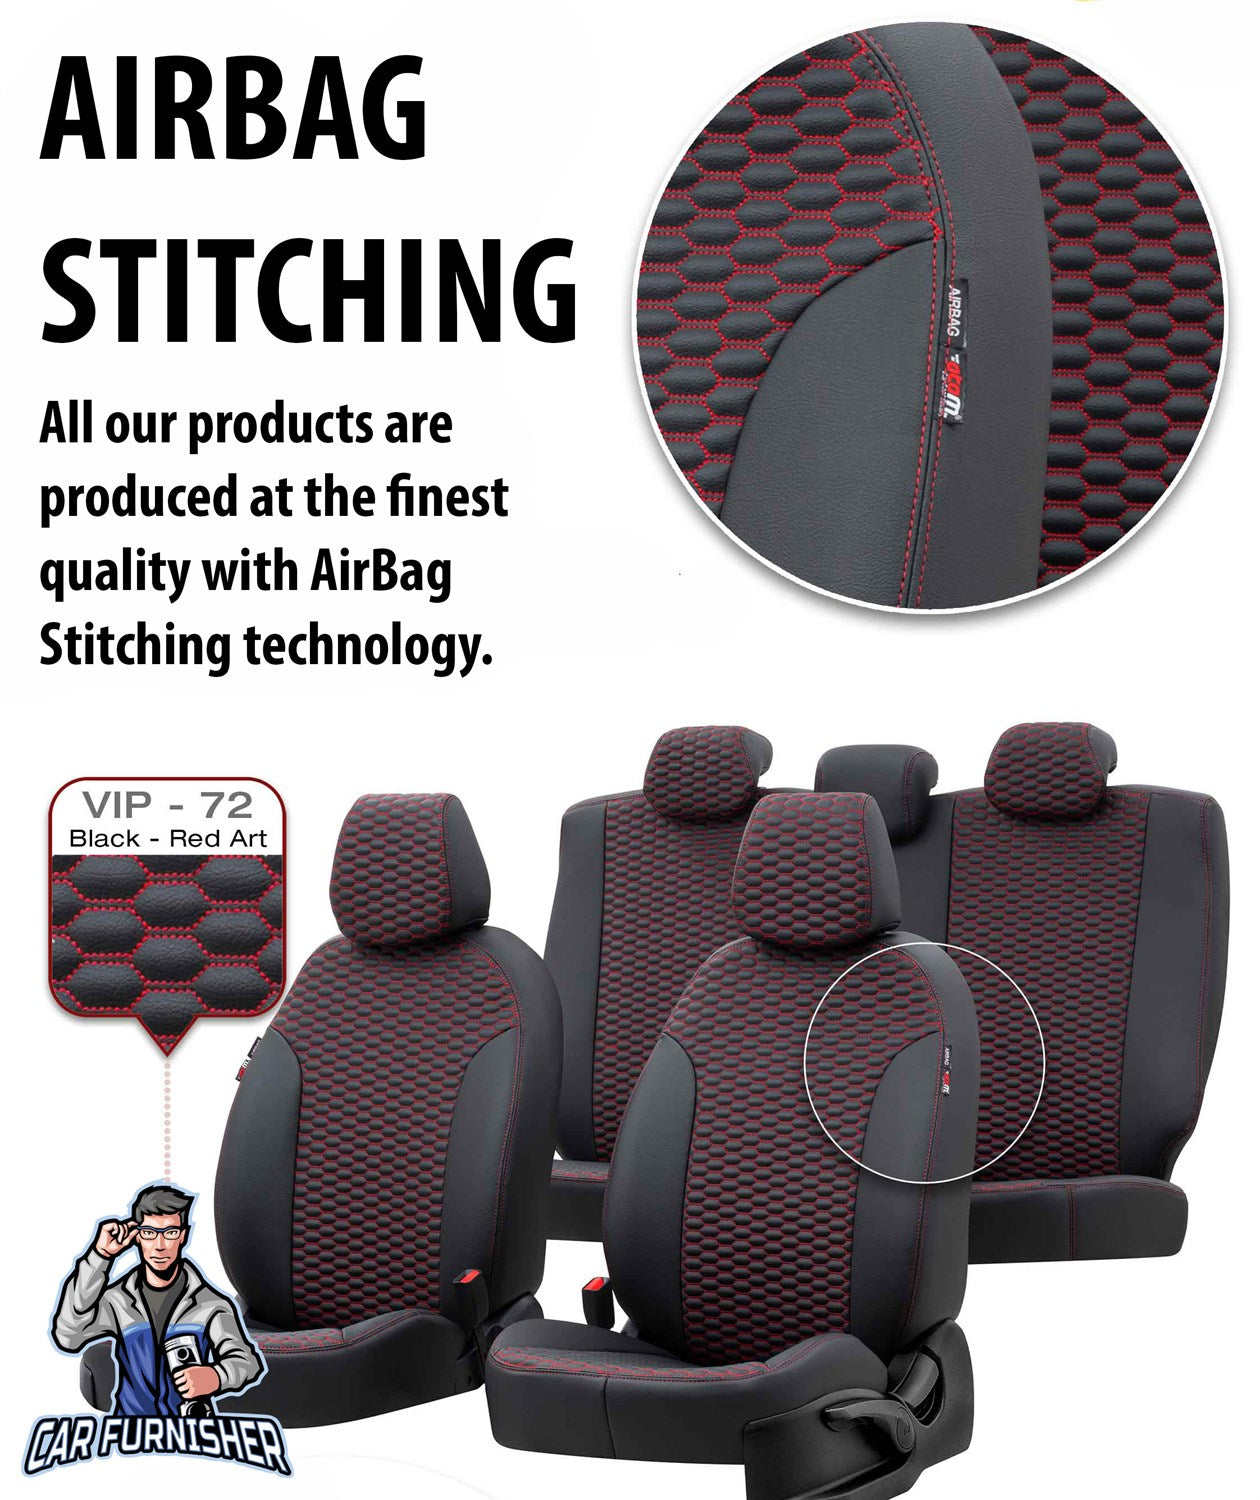 Nissan NV300 Seat Cover Madrid Foal Feather Design Dark Gray Leather